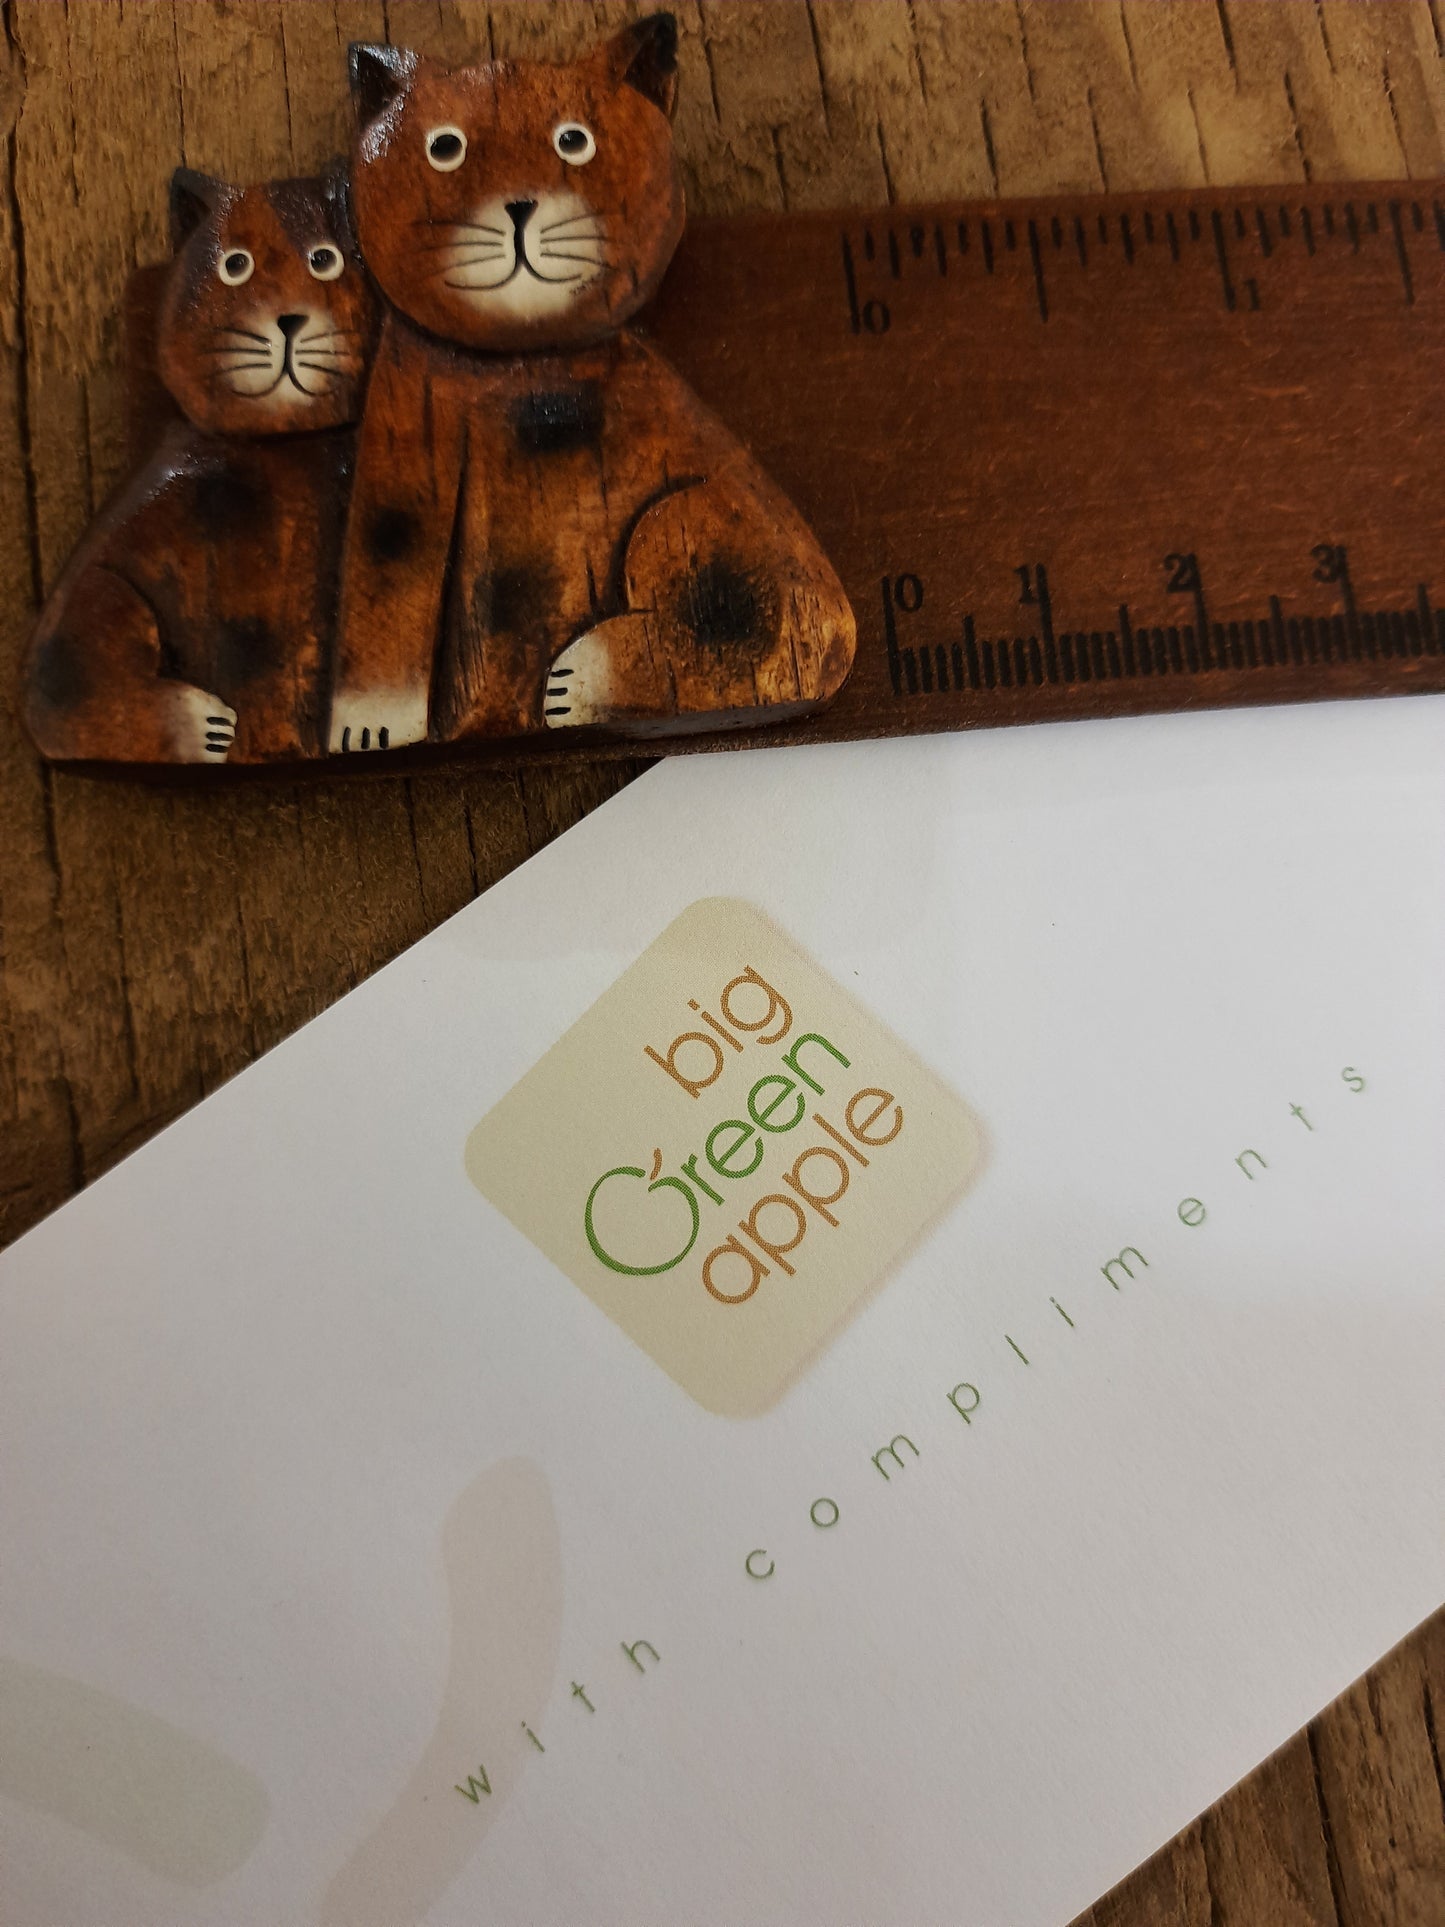 eco friendly gift ideas, wooden fair trade cat ruler, ethically sourced, big green apple